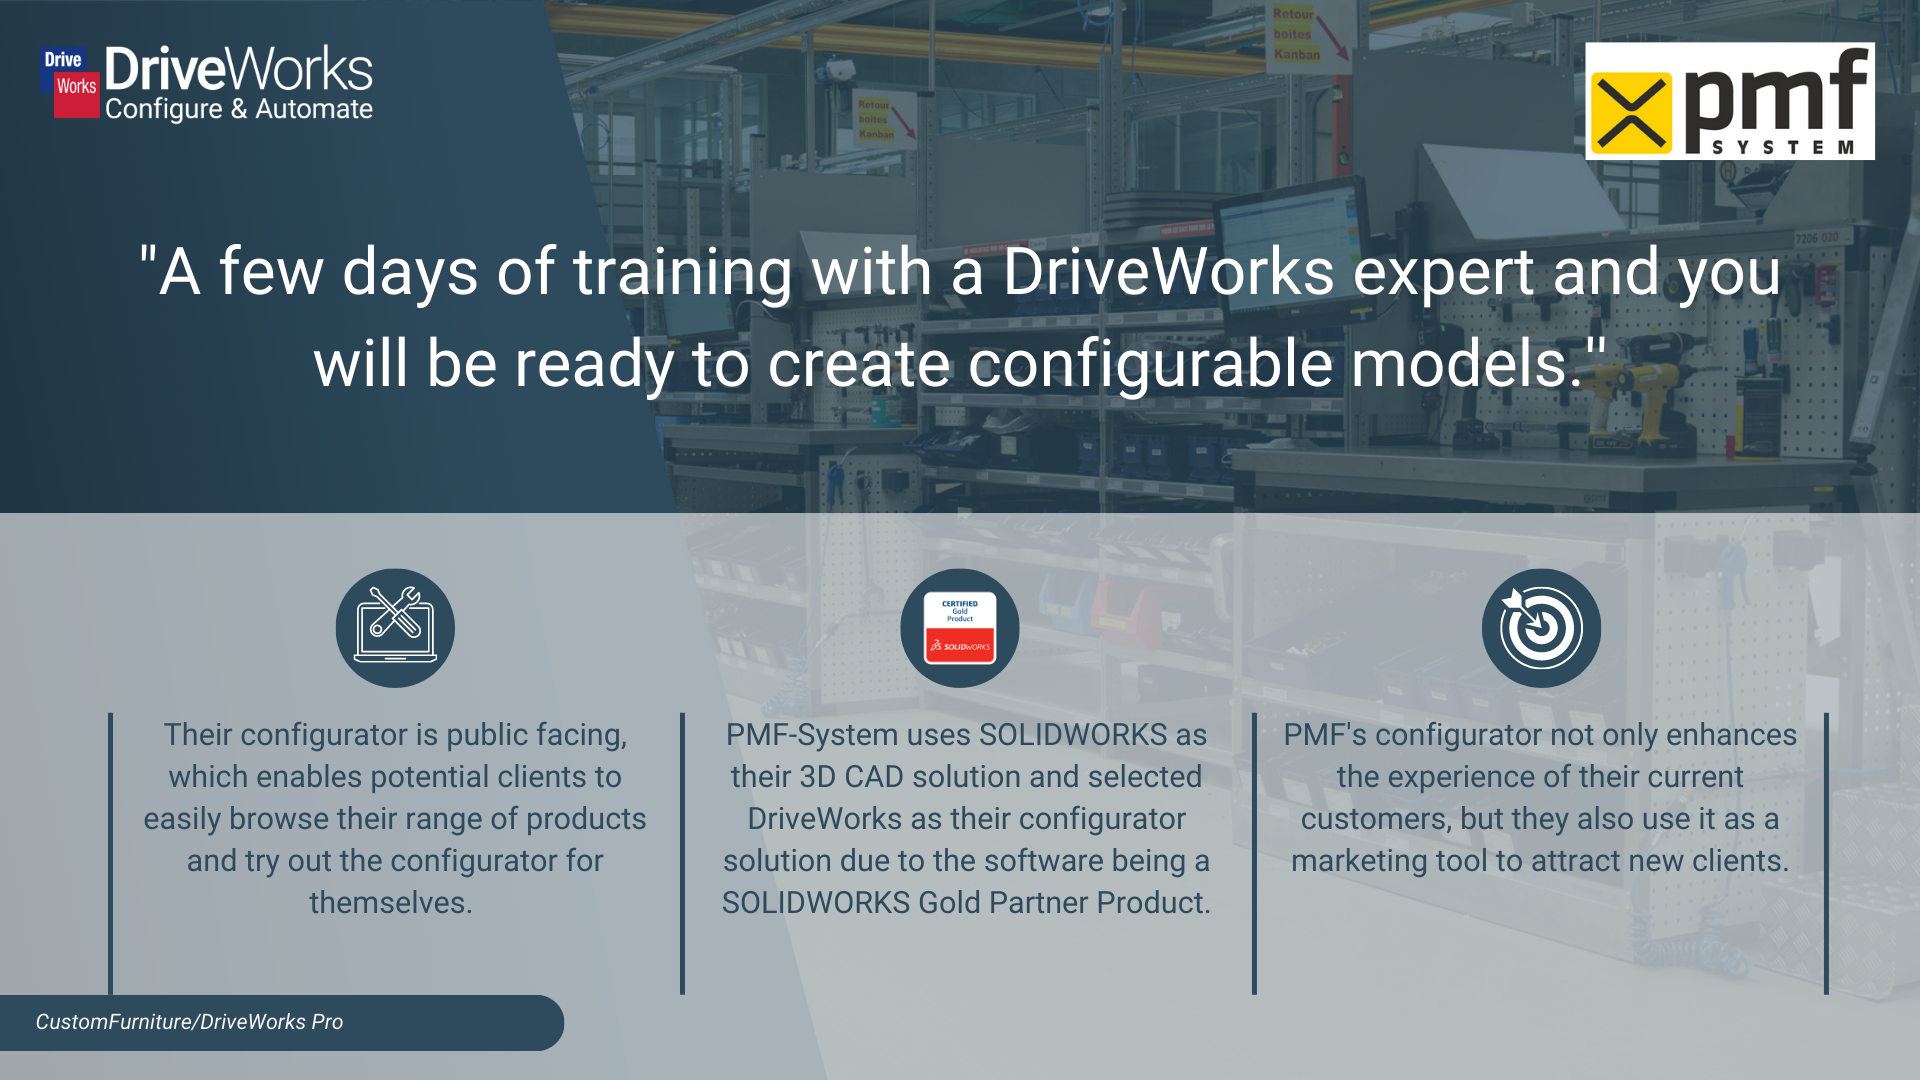 A summary of the benefits that PMF-System are experiencing since implementing DriveWorks. Text reads: "A few days of training with a DriveWorks expert and you will be ready to create configurable models.'' PMF-System uses SOLIDWORKS as their 3D CAD solution and selected DriveWorks as their configurator solution due to the software being a SOLIDWORKS Gold Partner Product. PMF's configurator not only enhances the experience of their current customers, but they also use it as a marketing tool to attract new clients.